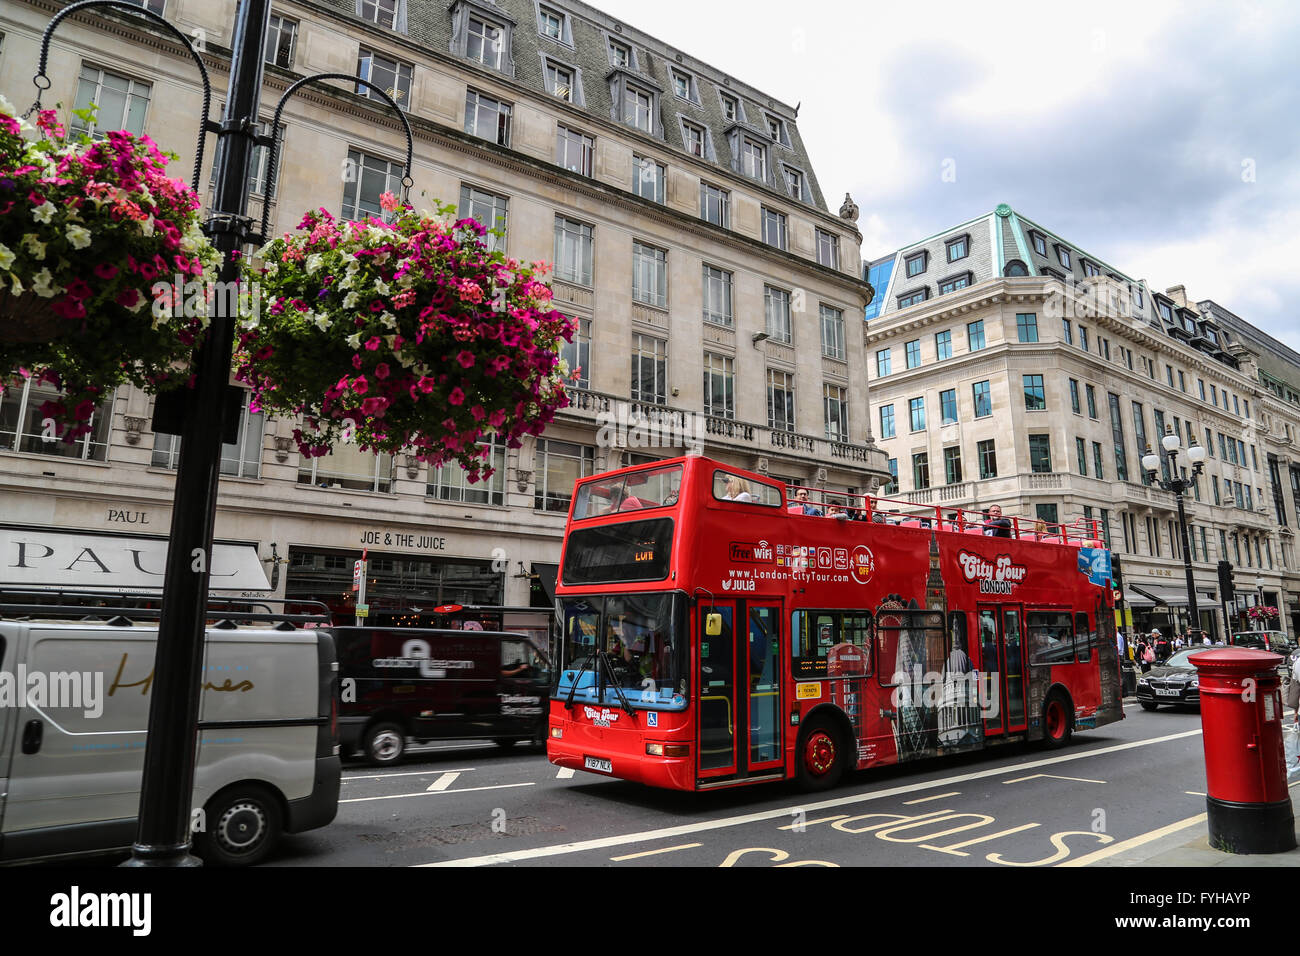 A classic red double decker London bus on Oxford Street. Stock Photo